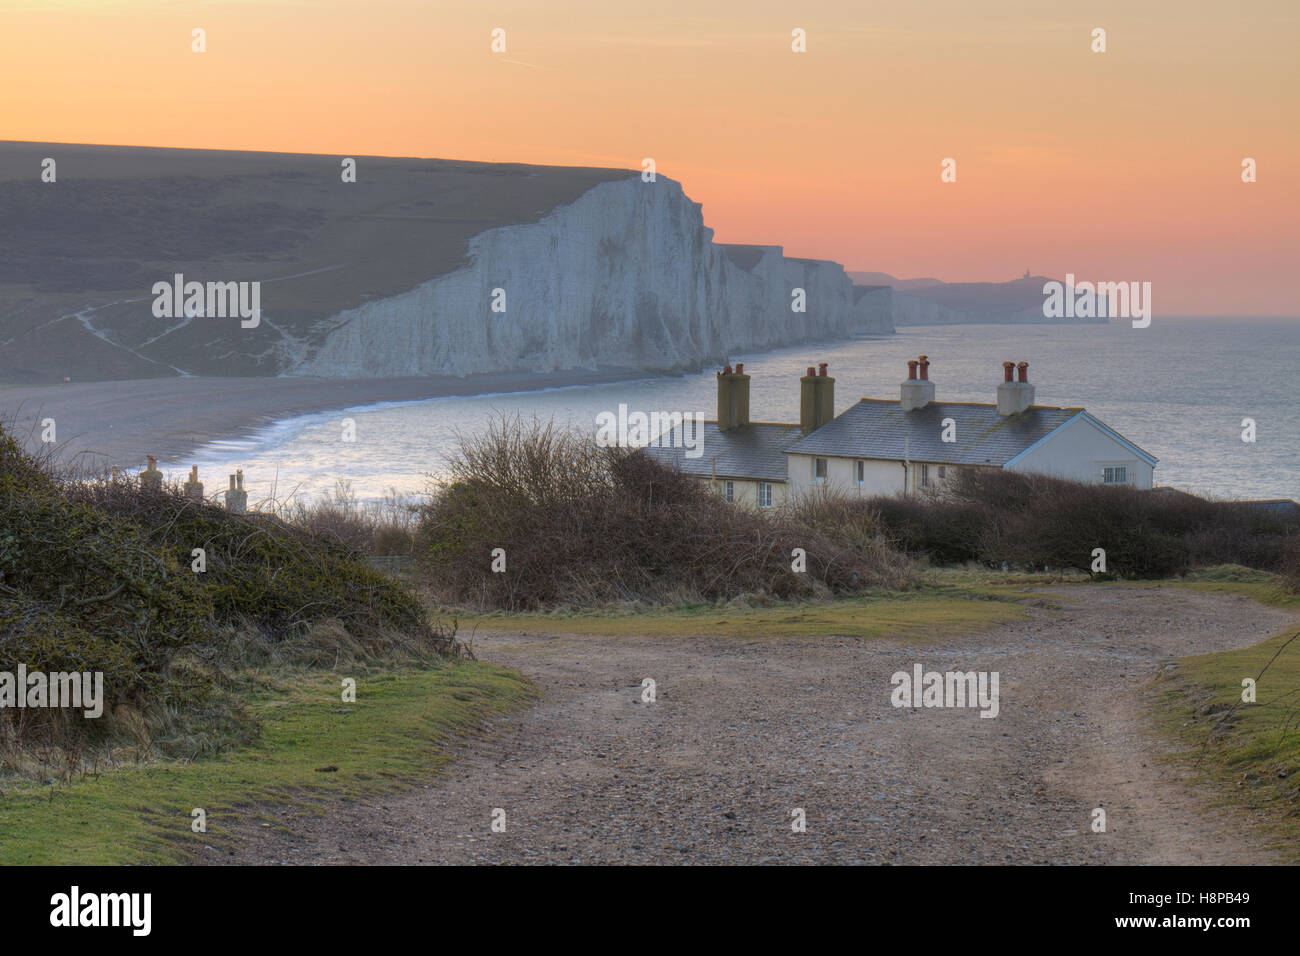 The Seven Sisters cliffs and coastguard cottages at dawn. From Seaford Head, South Downs, East Sussex, England. February. Stock Photo